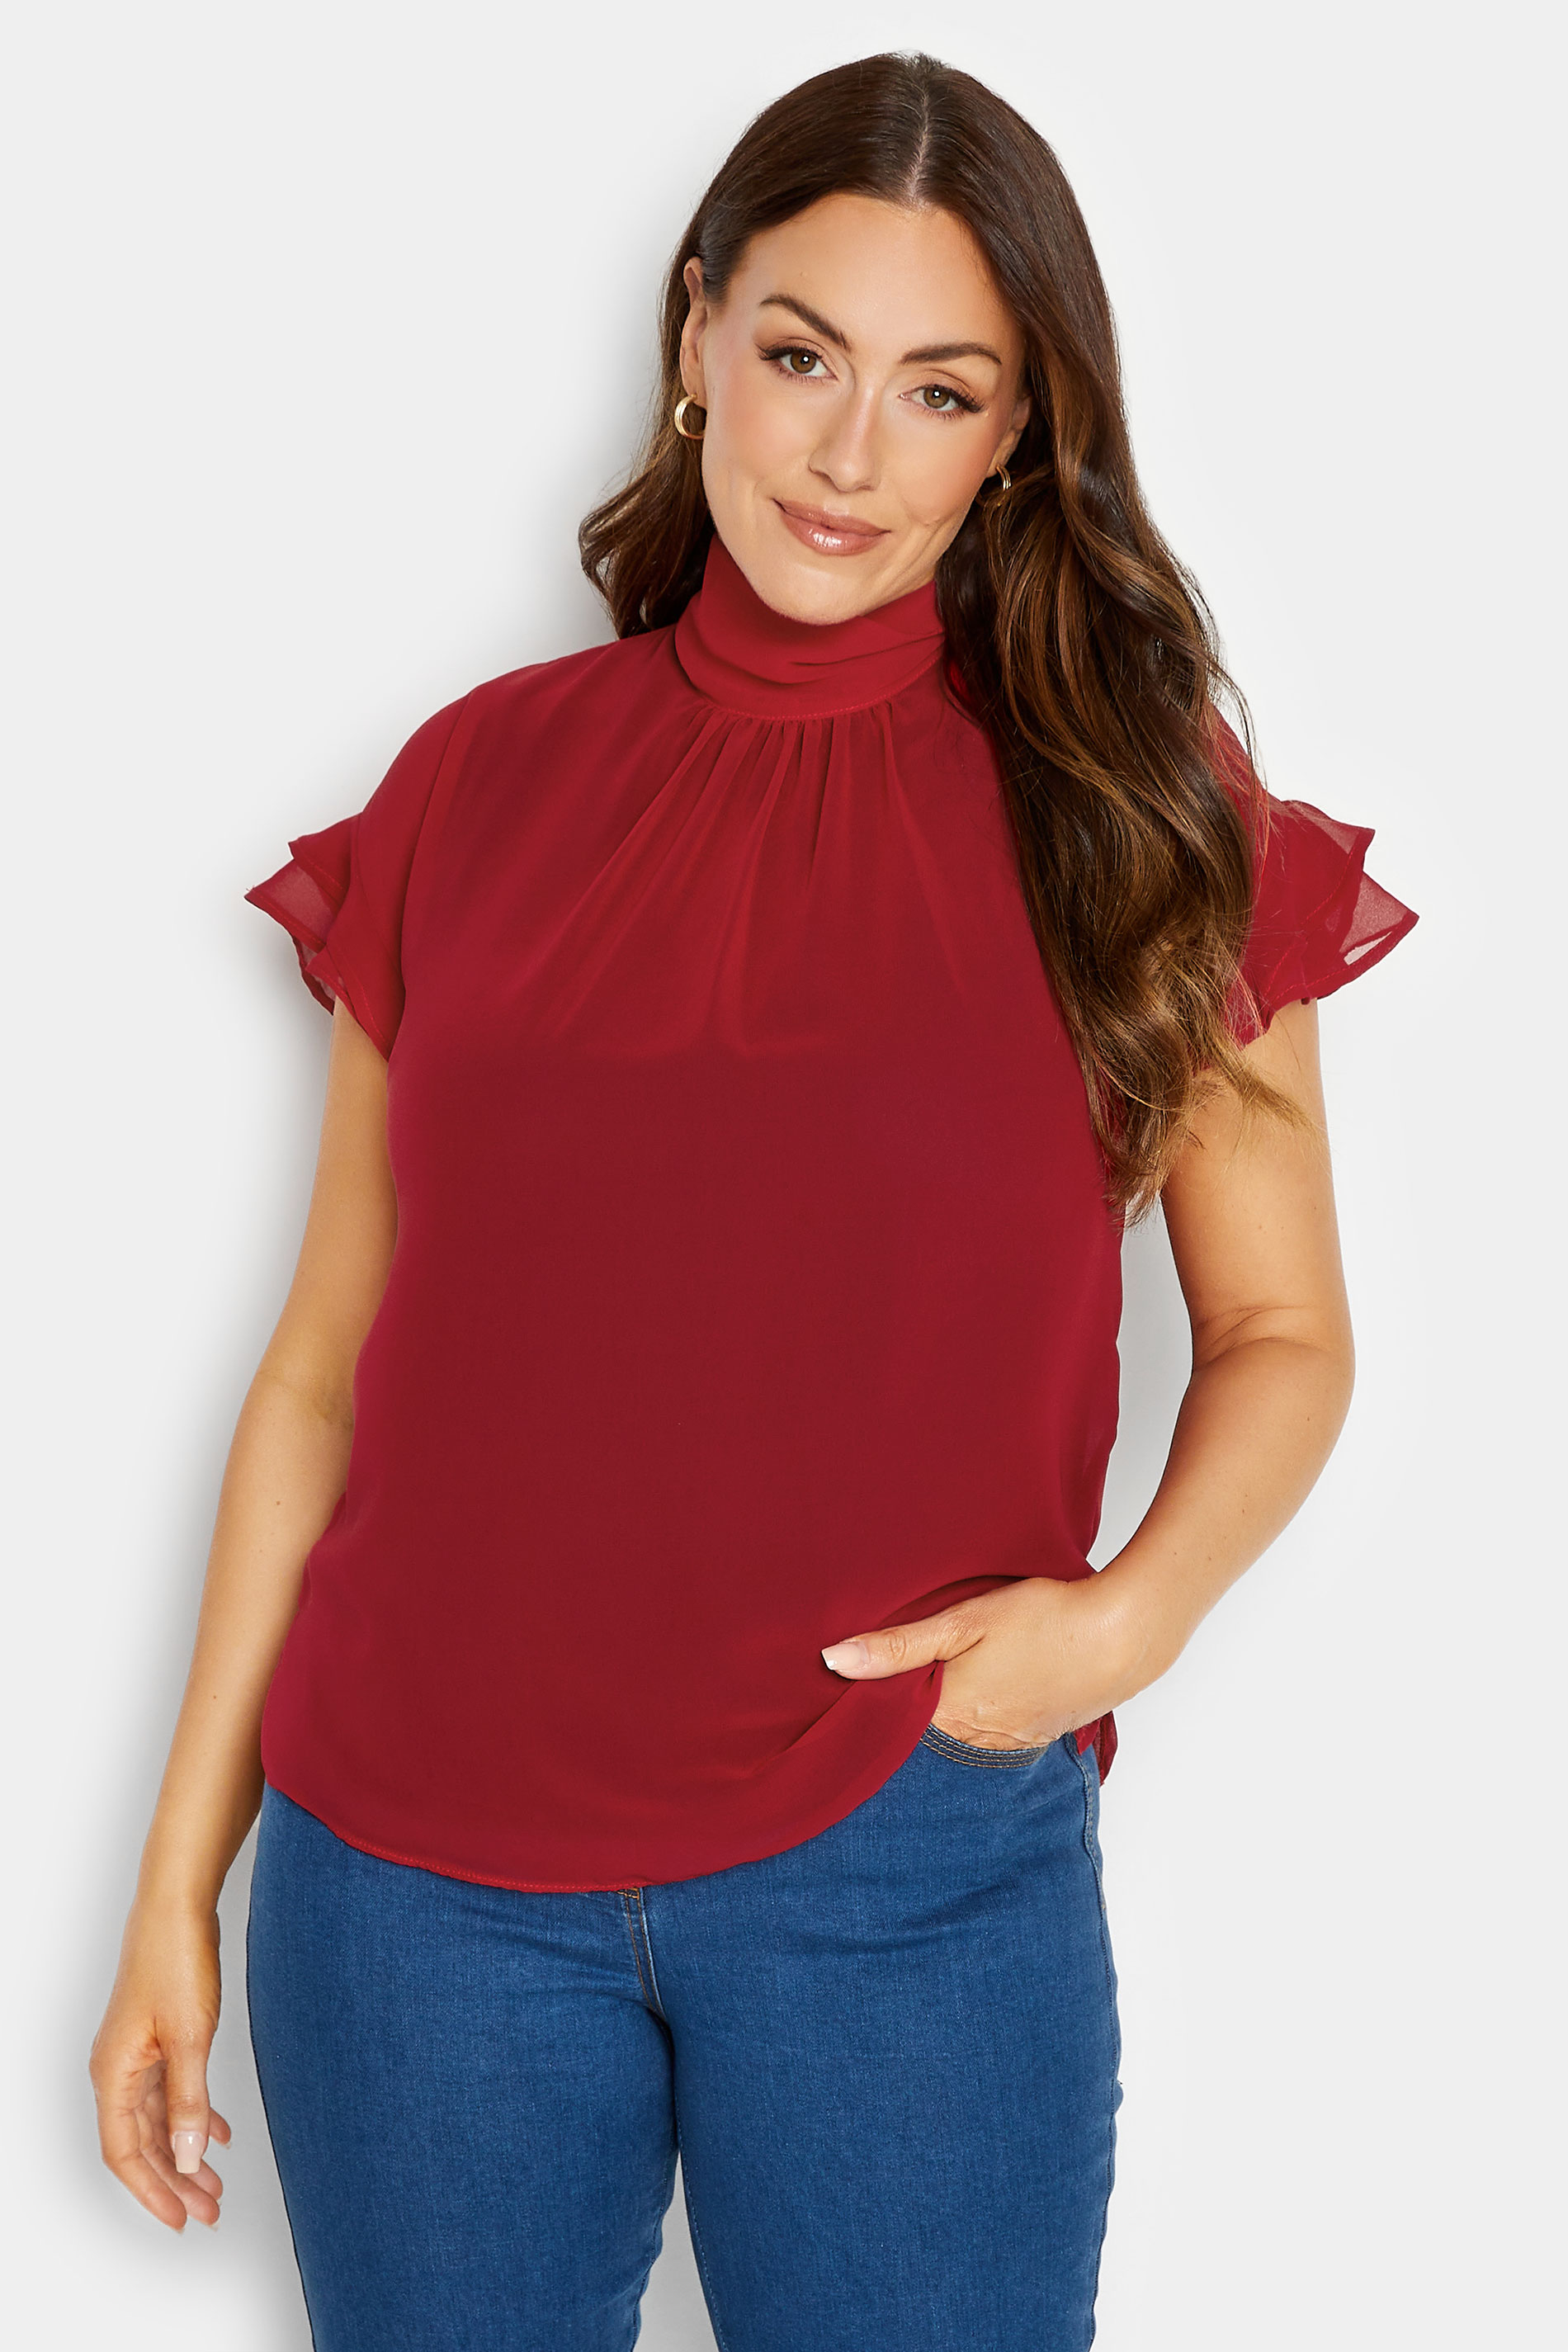 M&Co Red High Neck Frill Sleeve Blouse | M&Co 1